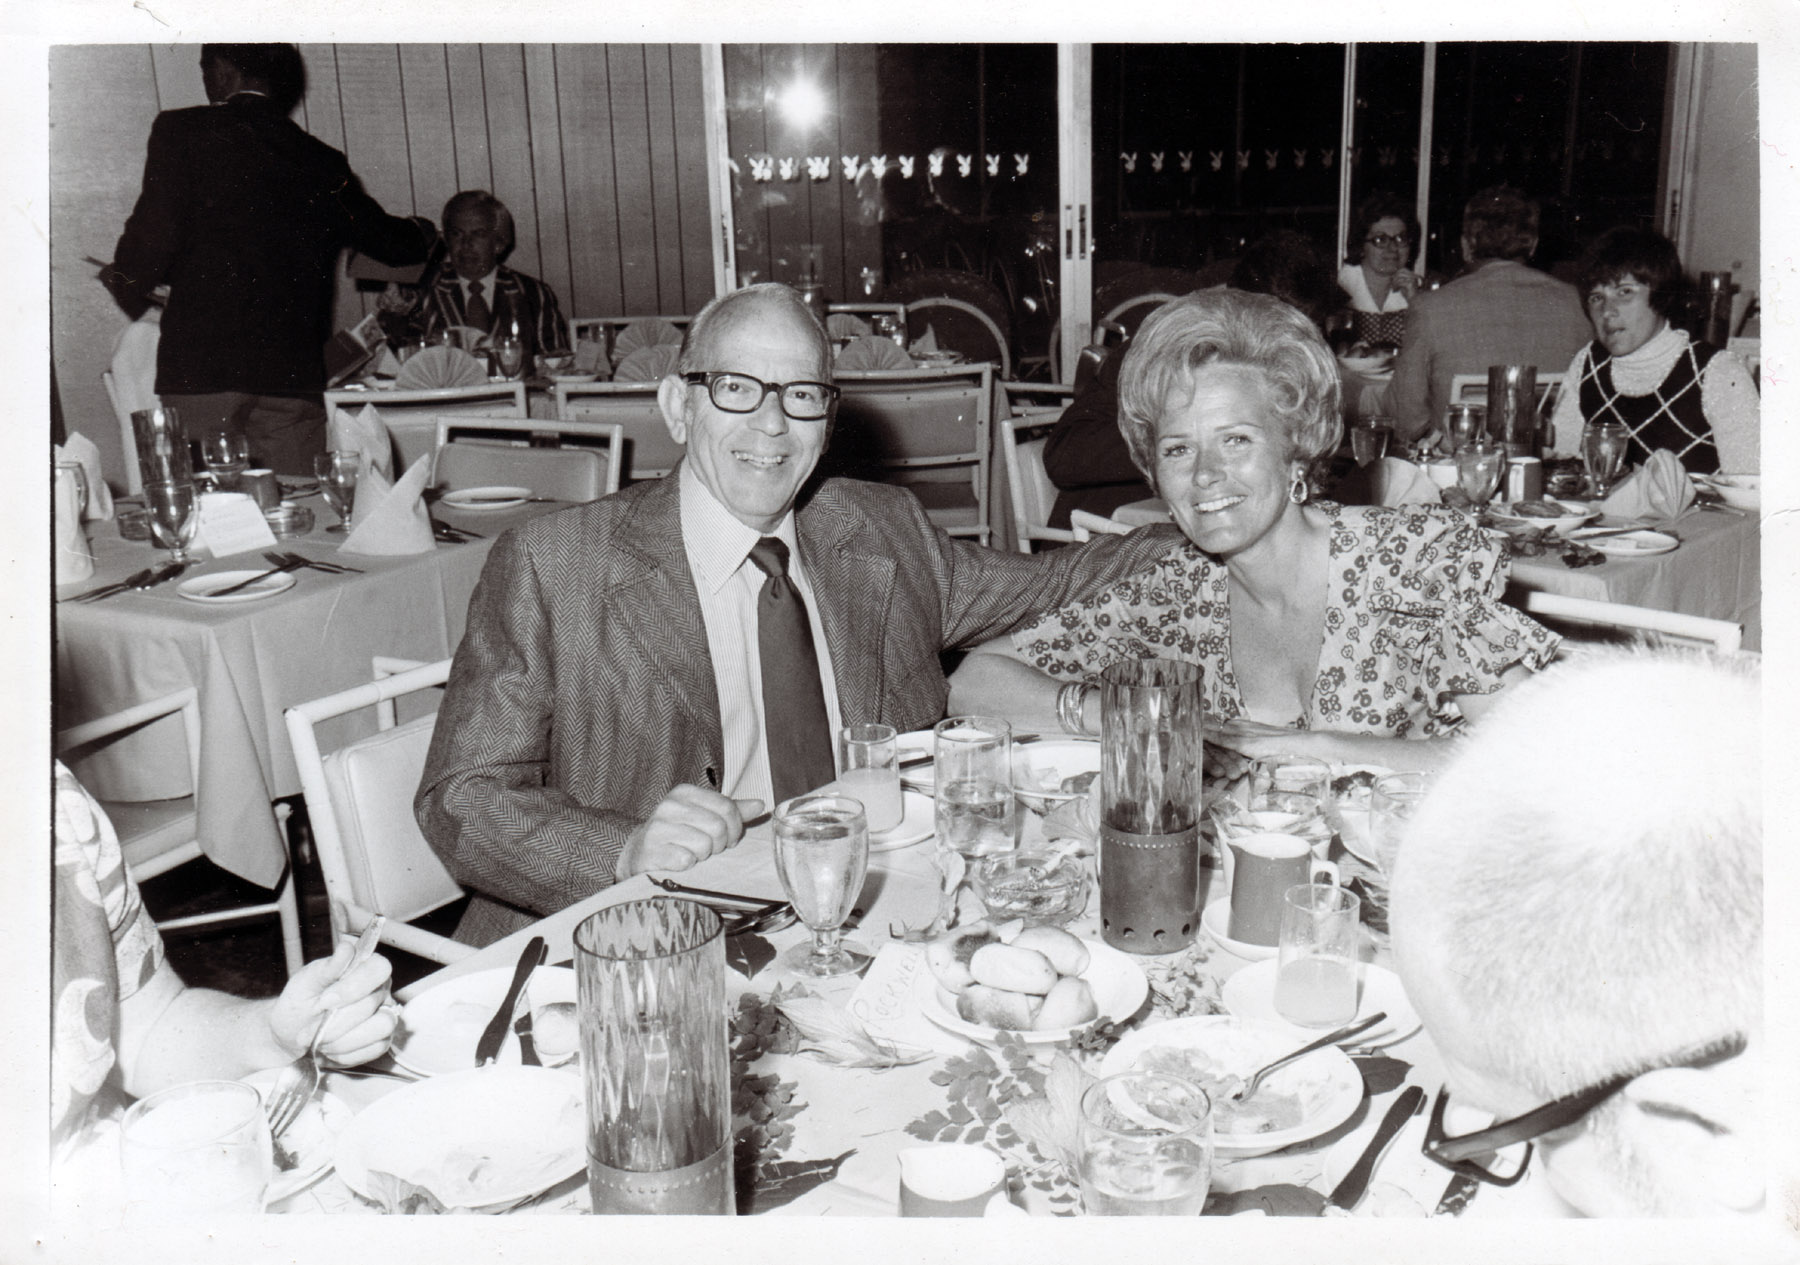 My parents having dinner at the Playboy Club in L.A., circa 1970.